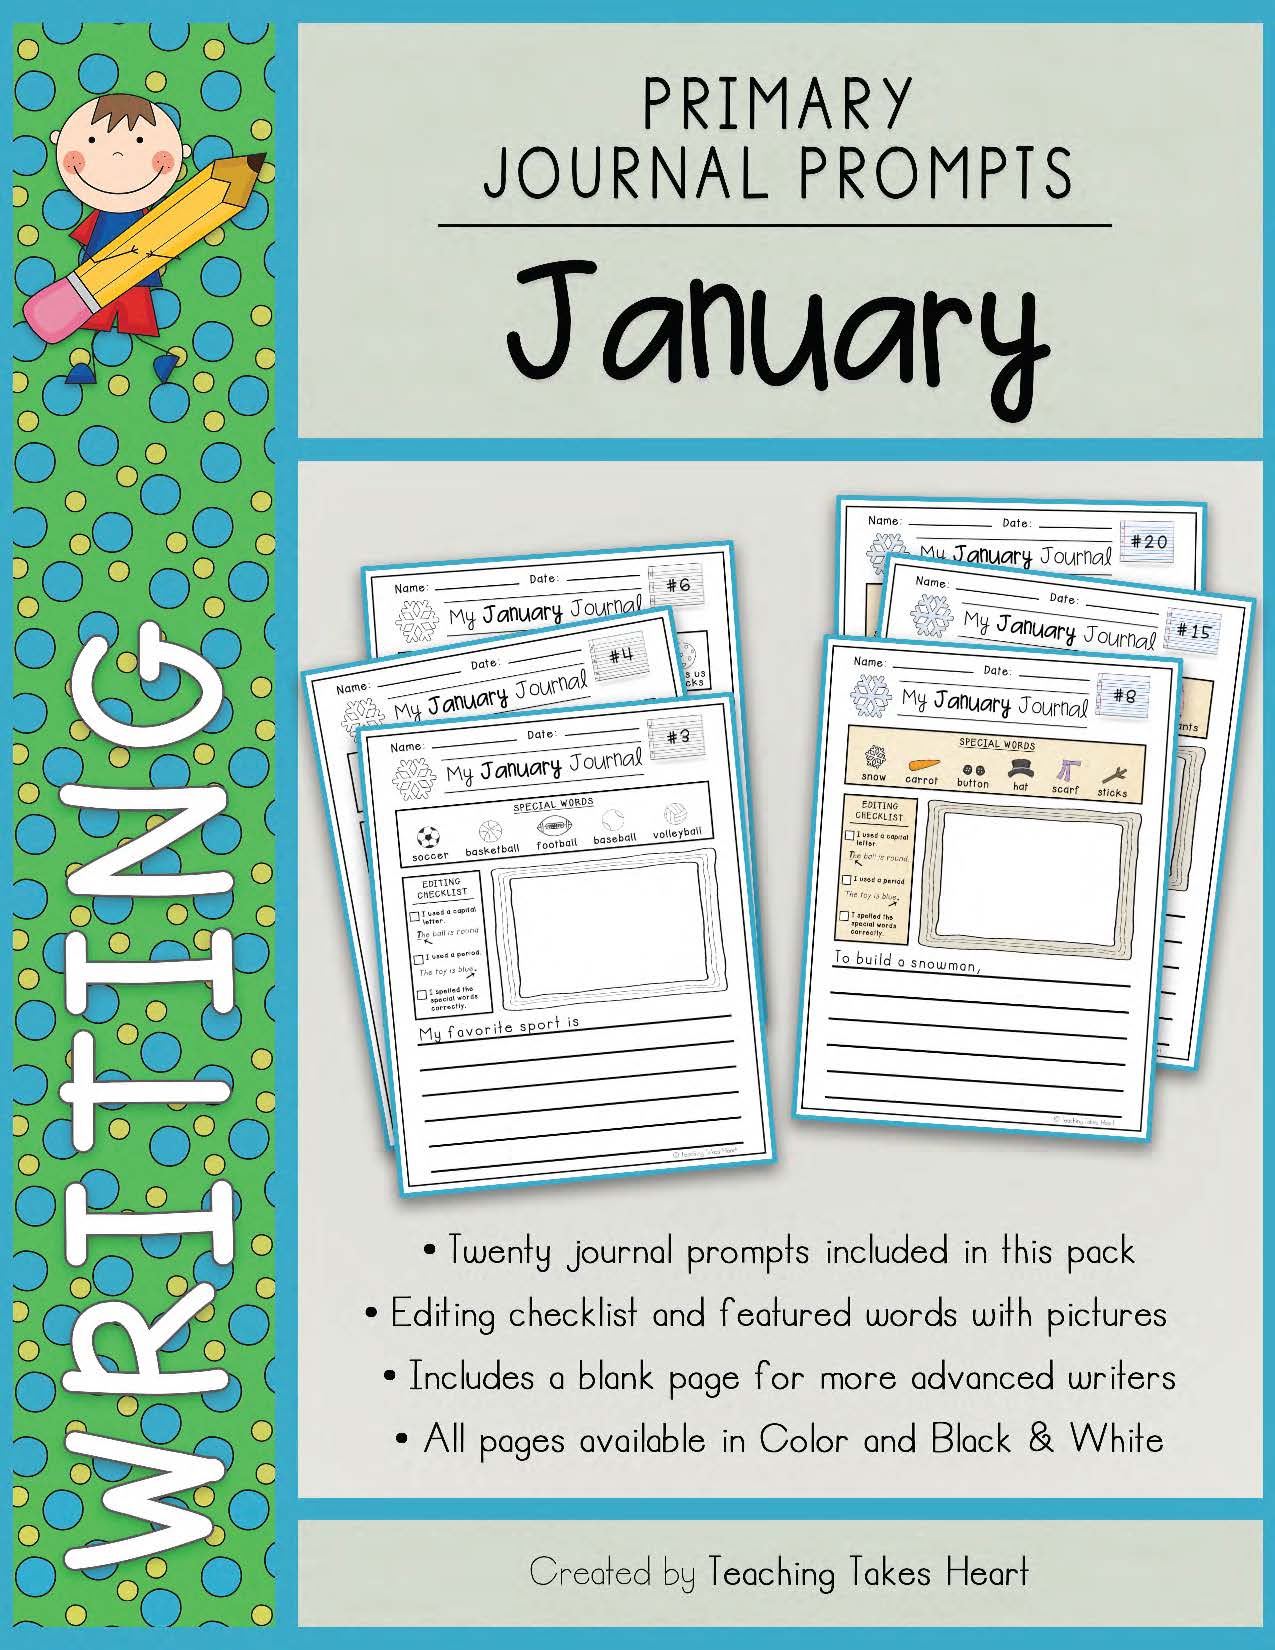 FREE Primary Writing Journal Prompts: January - Teaching Takes Heart